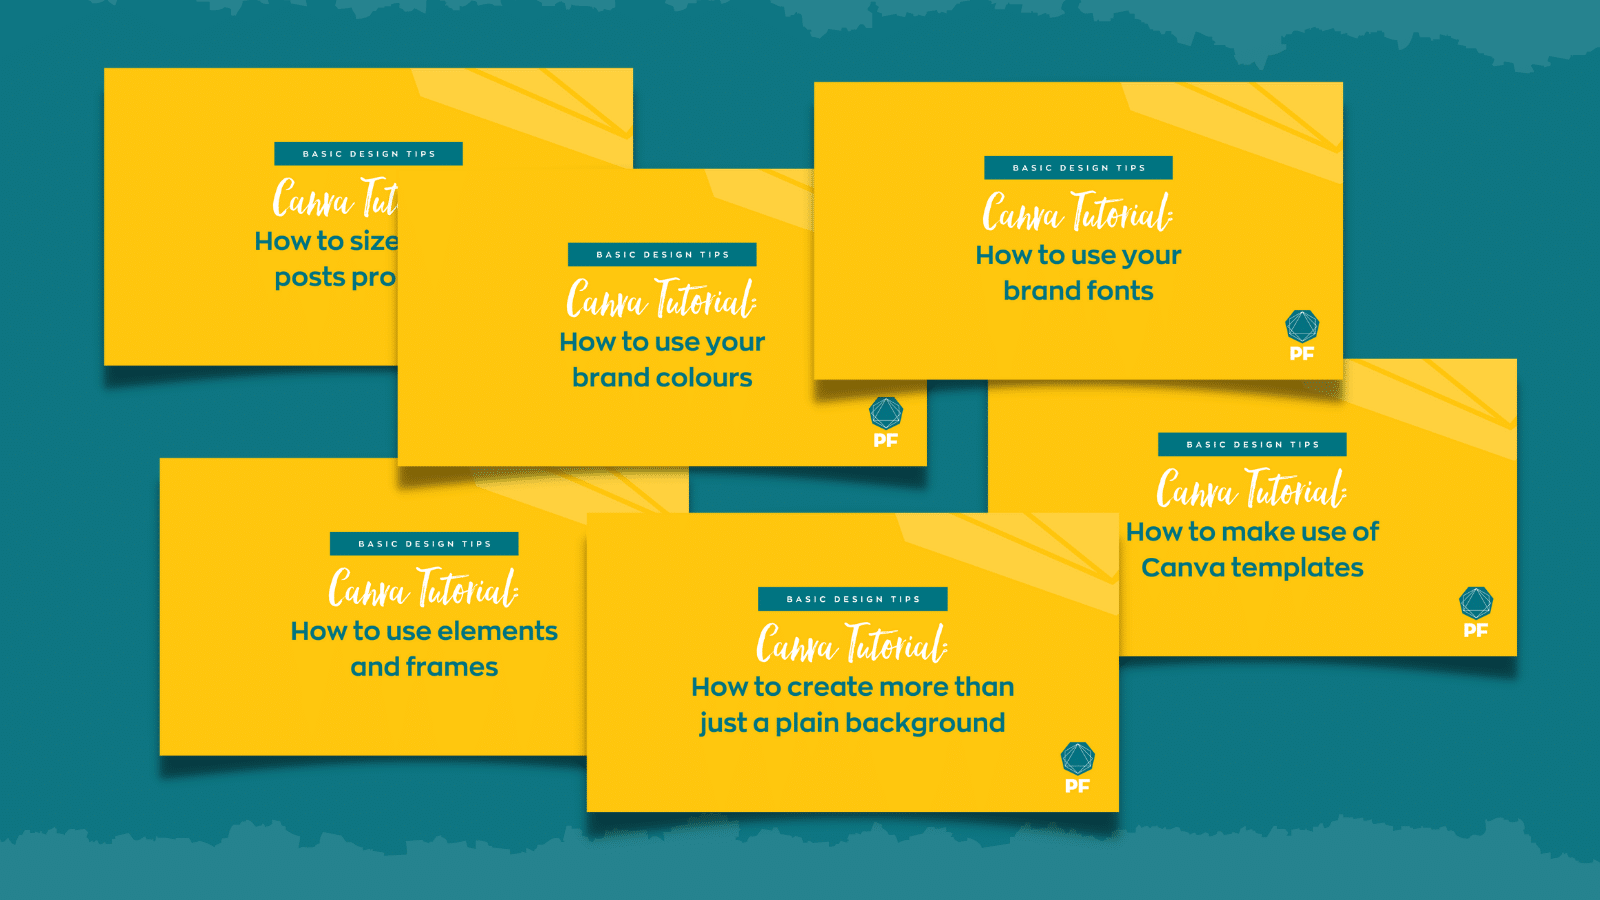 How to use Canva to create your own branded social posts